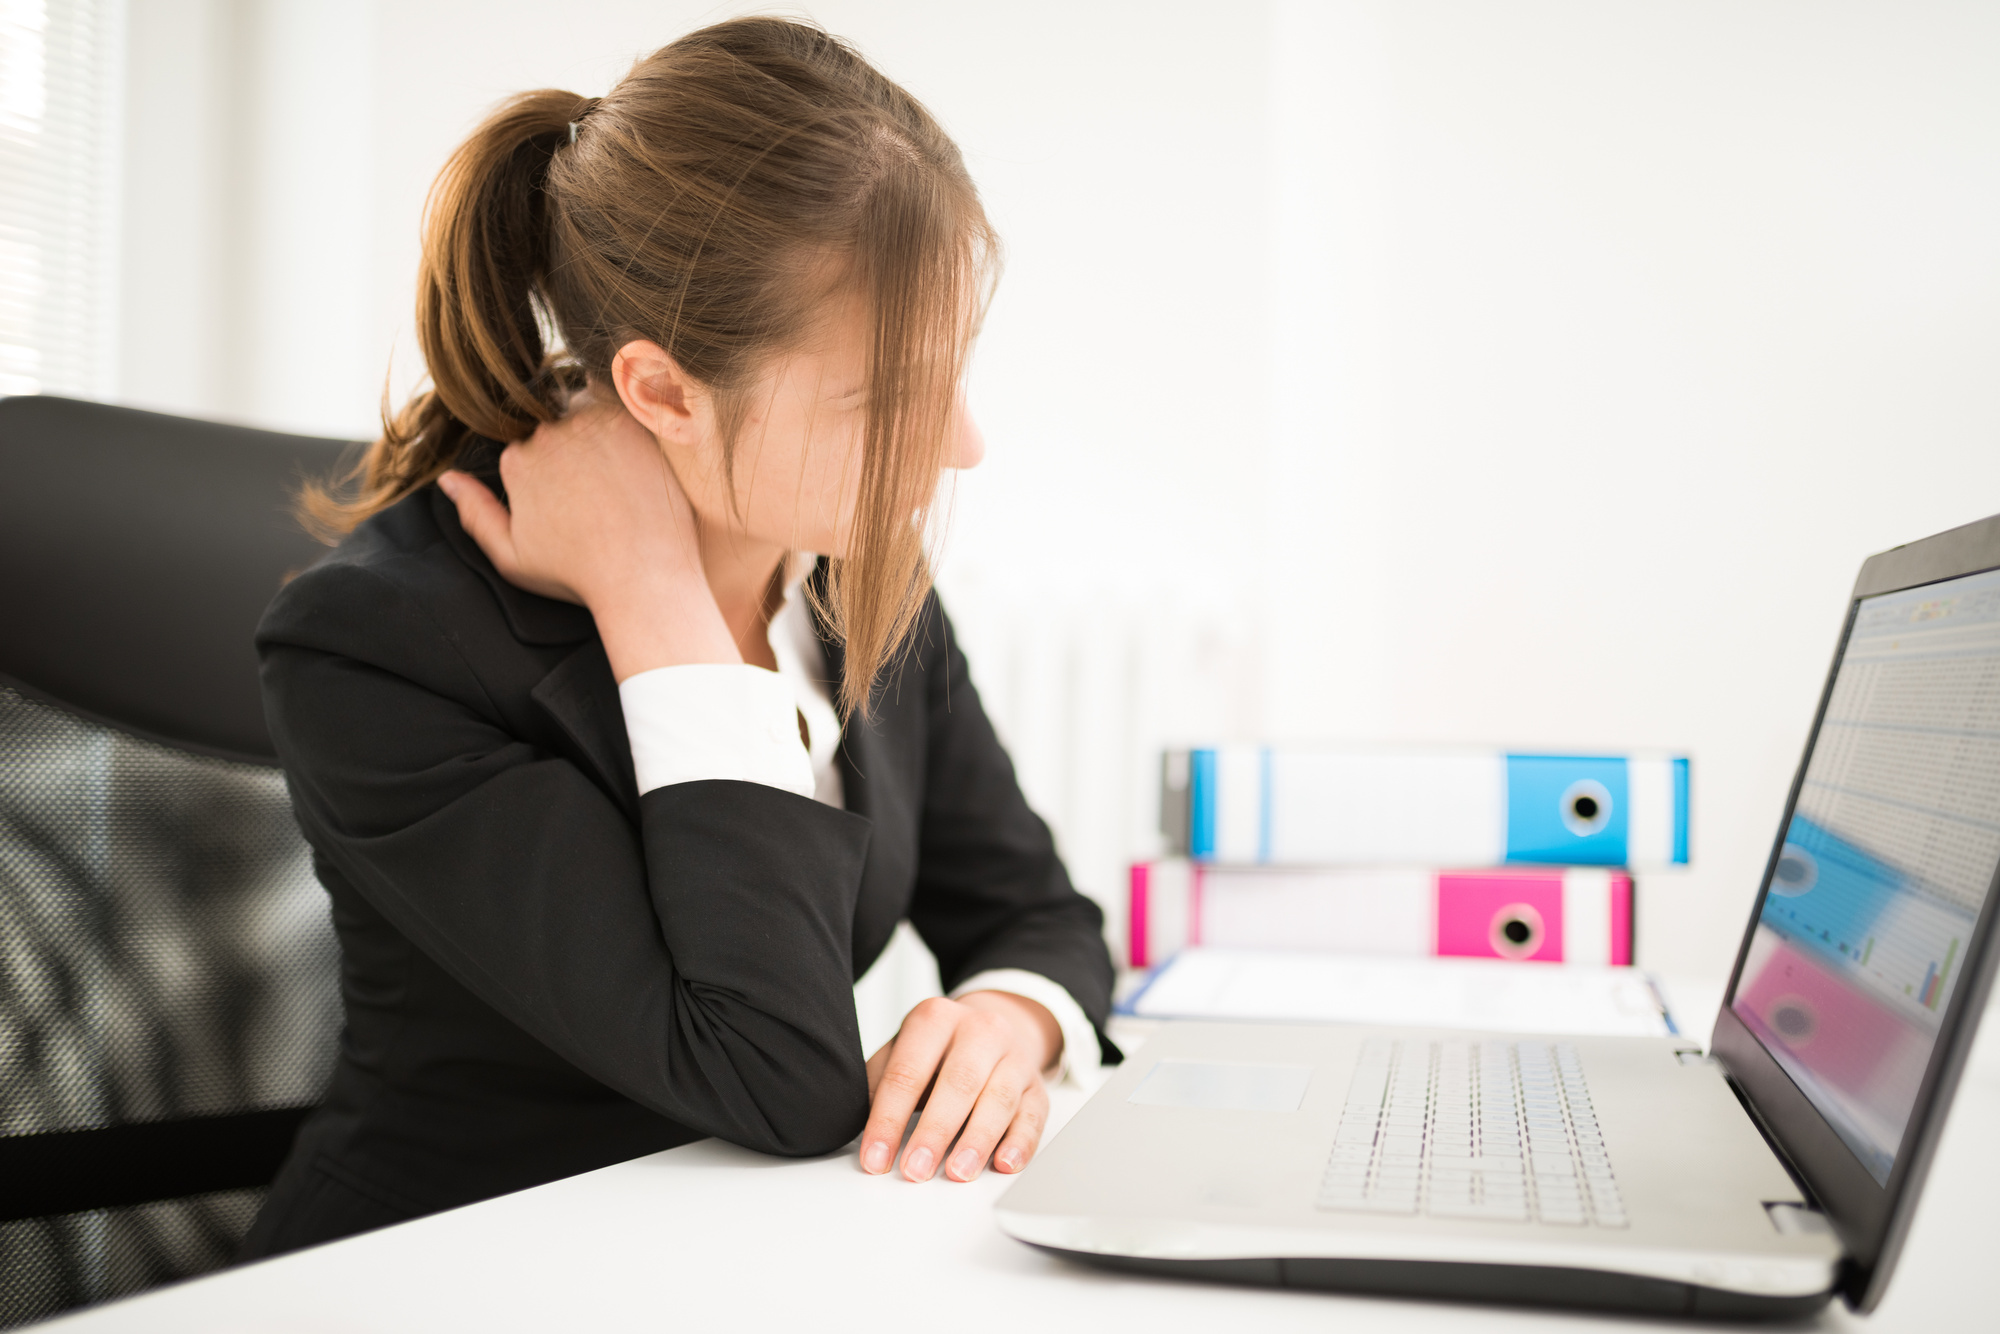 Woman Suffering from Bad Posture at Work